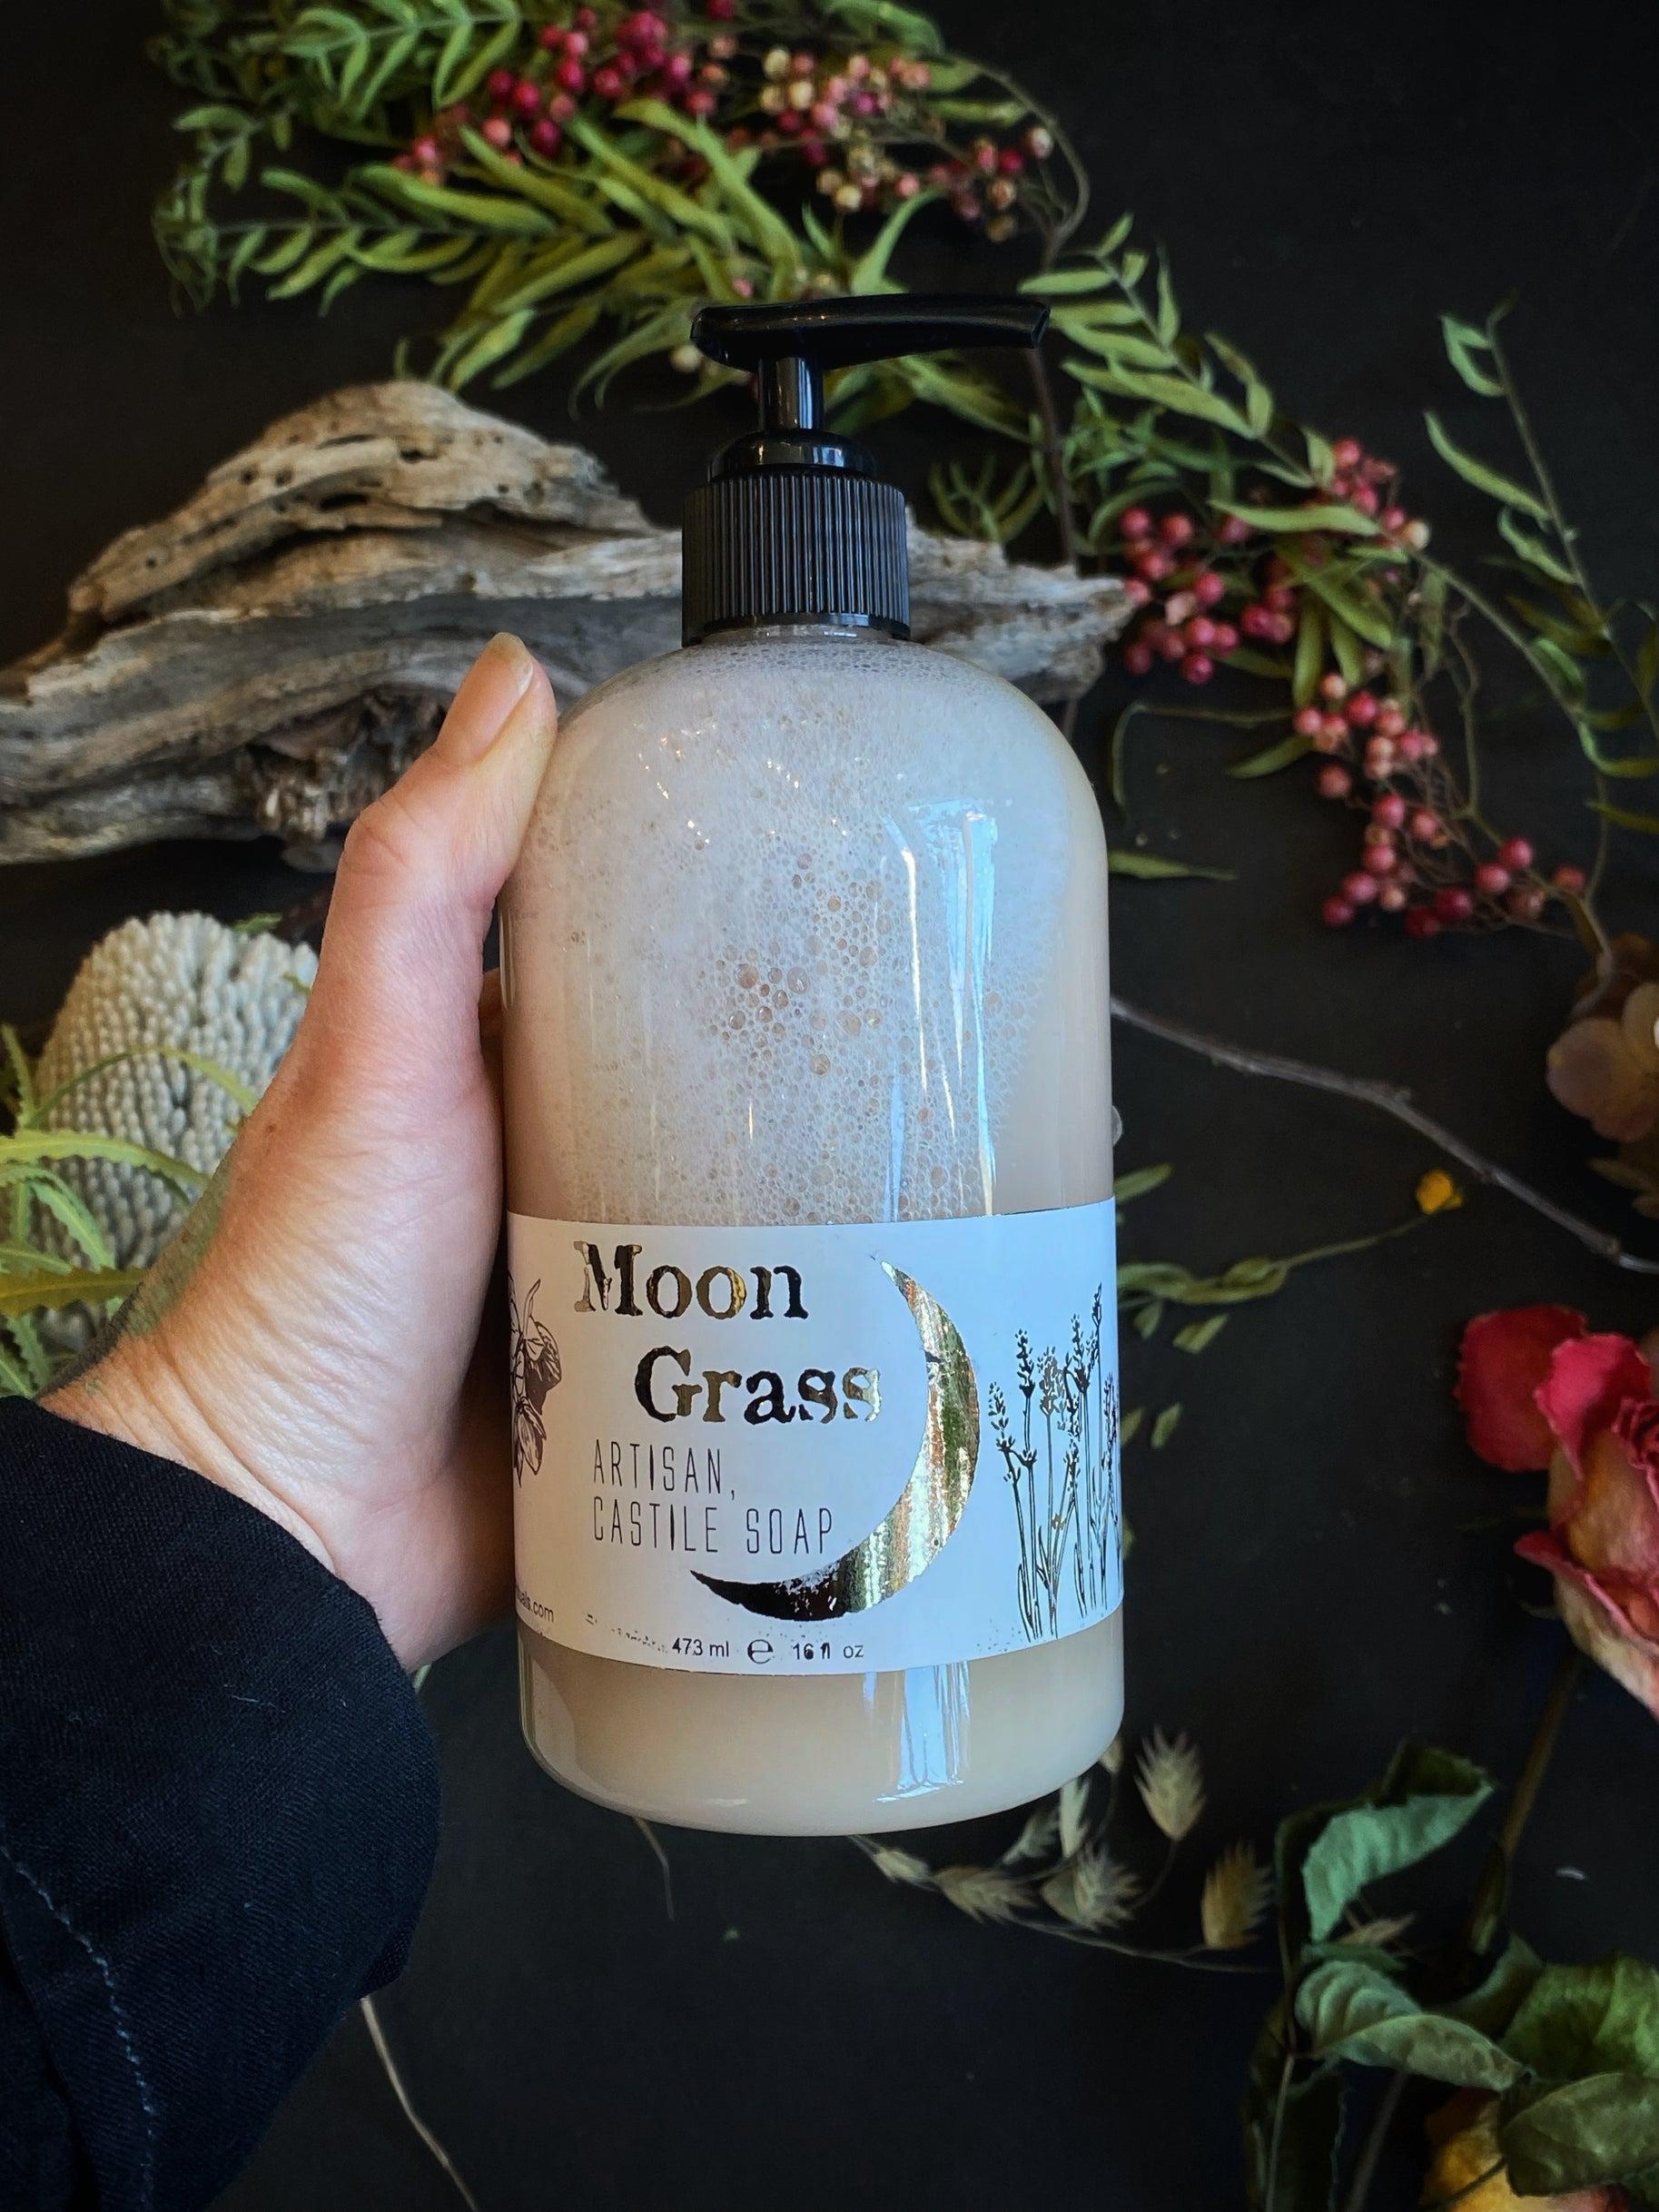 Moon Grass - Artisan, Superfatted Liquid Castile Soap for the Face and Body